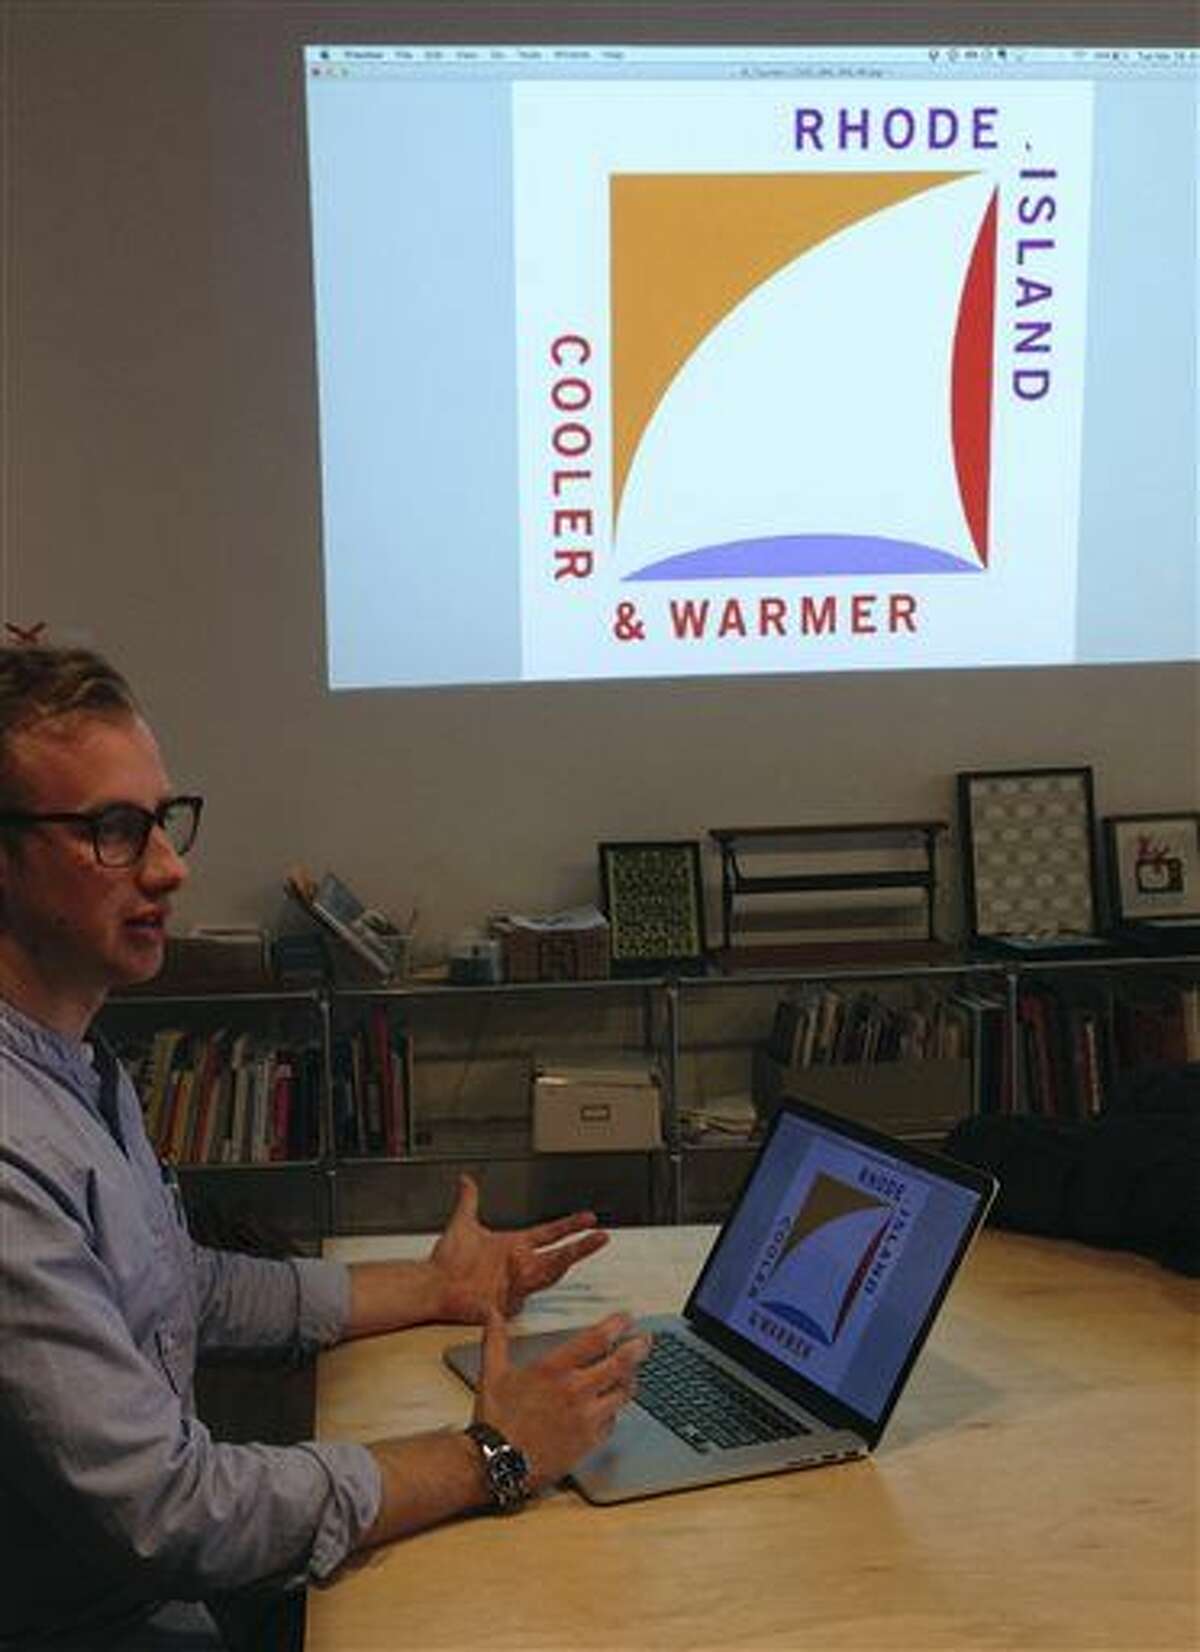 Greg Nemes, of the design firm Work-Shop, displays the new logo for a campaign to attract tourism and business to Rhode Island, during an interview with The Associated Press in The Design Office, Tuesday, March 29, 2016, in Providence, R.I. The state released the logo this week, created by Milton Glaser, whose past work includes the iconic "I Love NY" logo. (AP Photo/Michelle R. Smith)